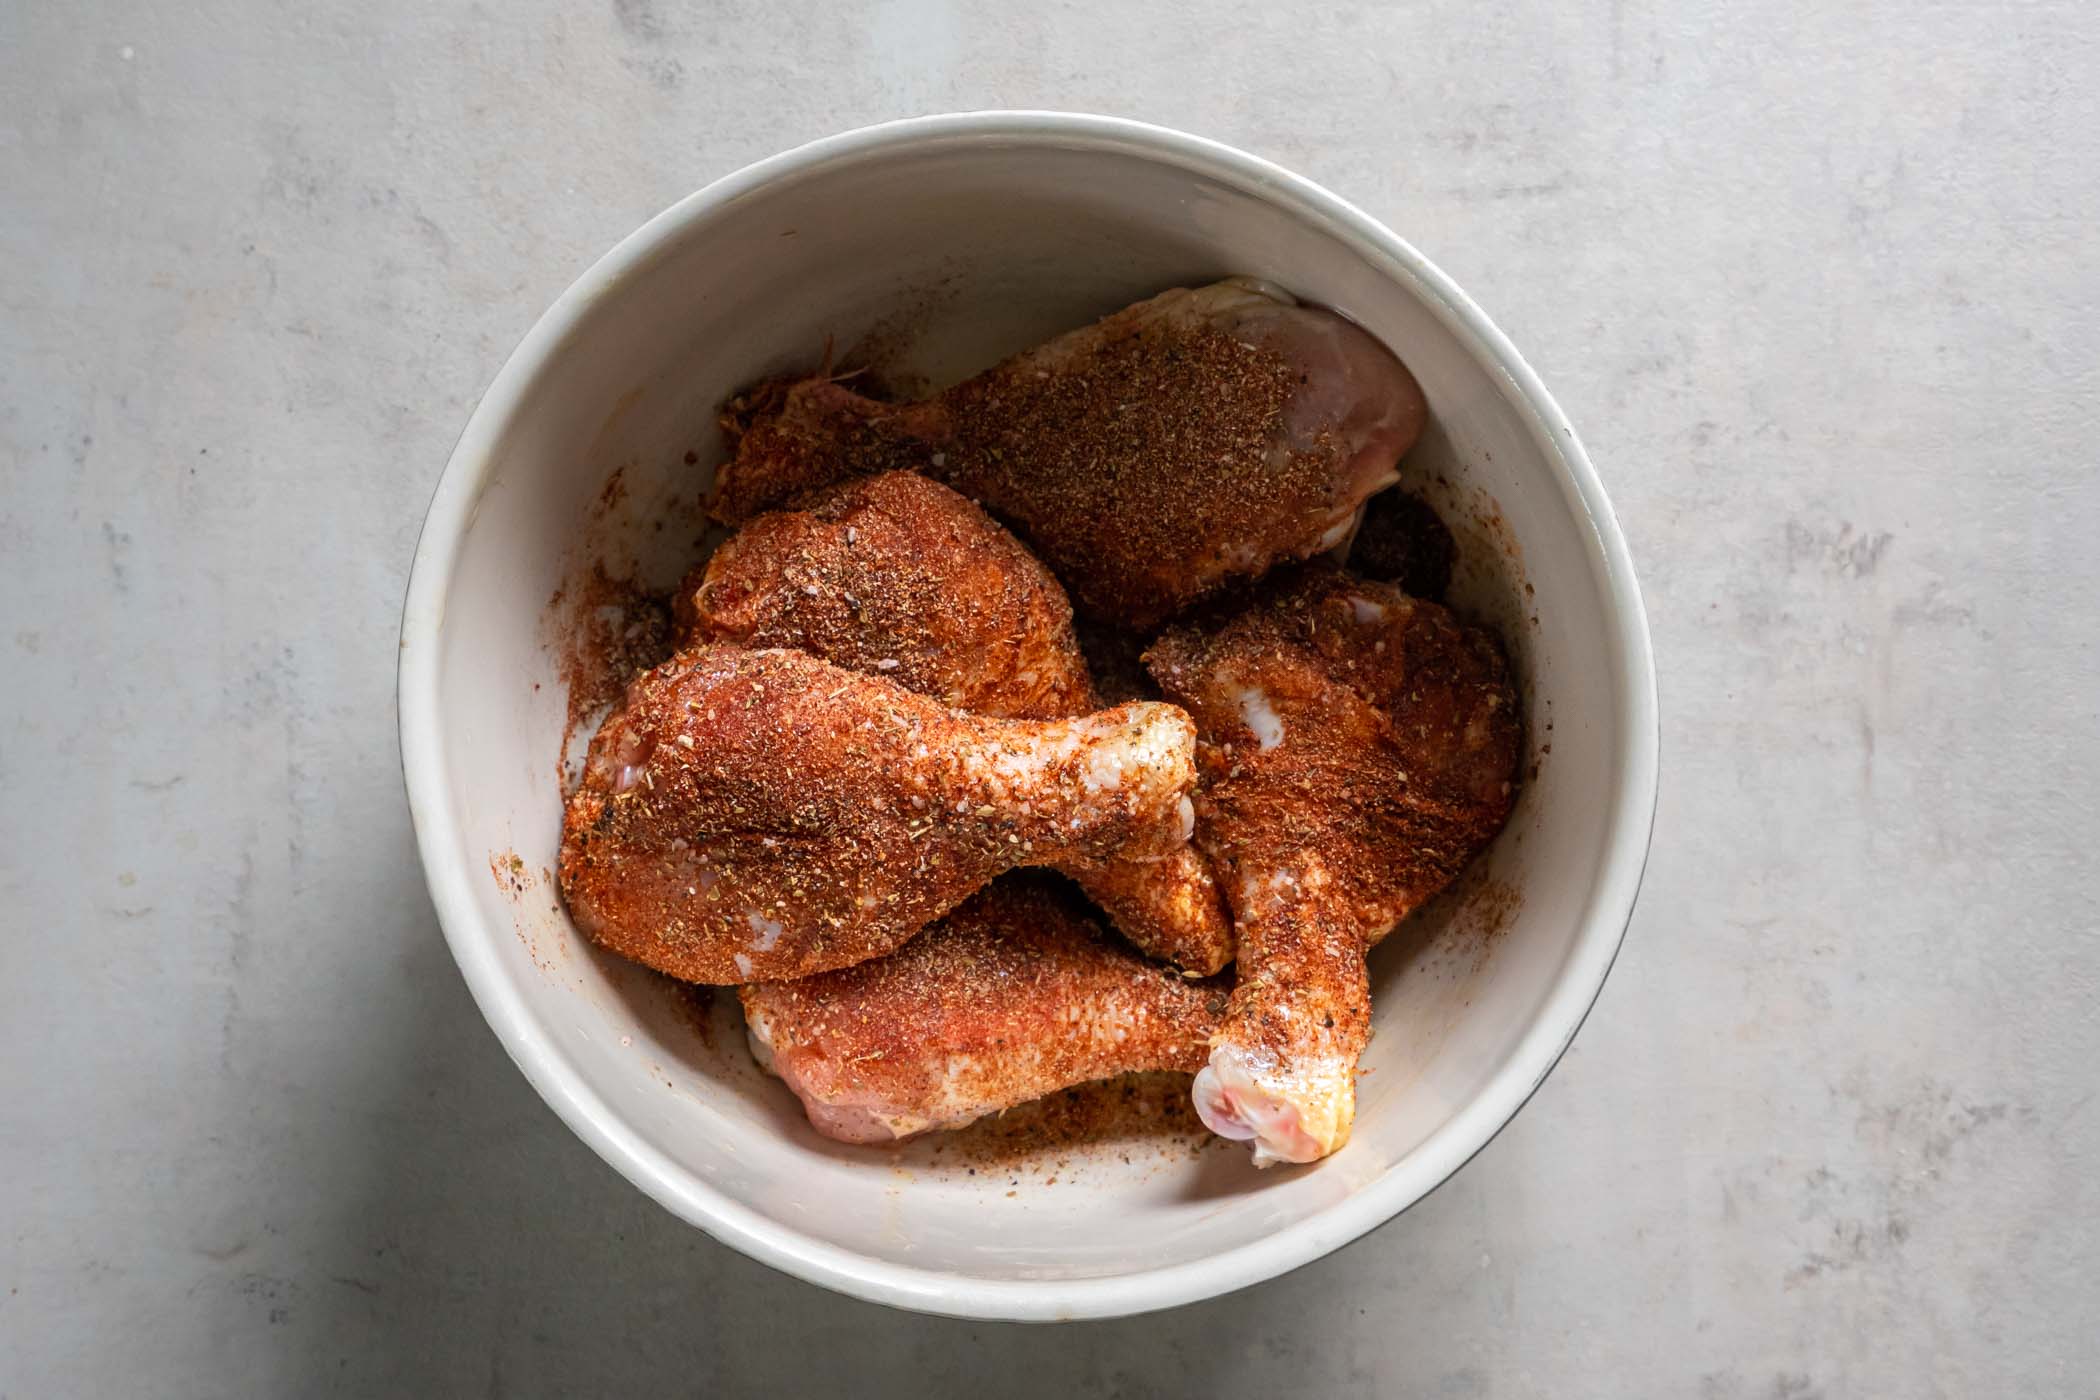 Chicken drumsticks tossed with seasonings in a bowl.